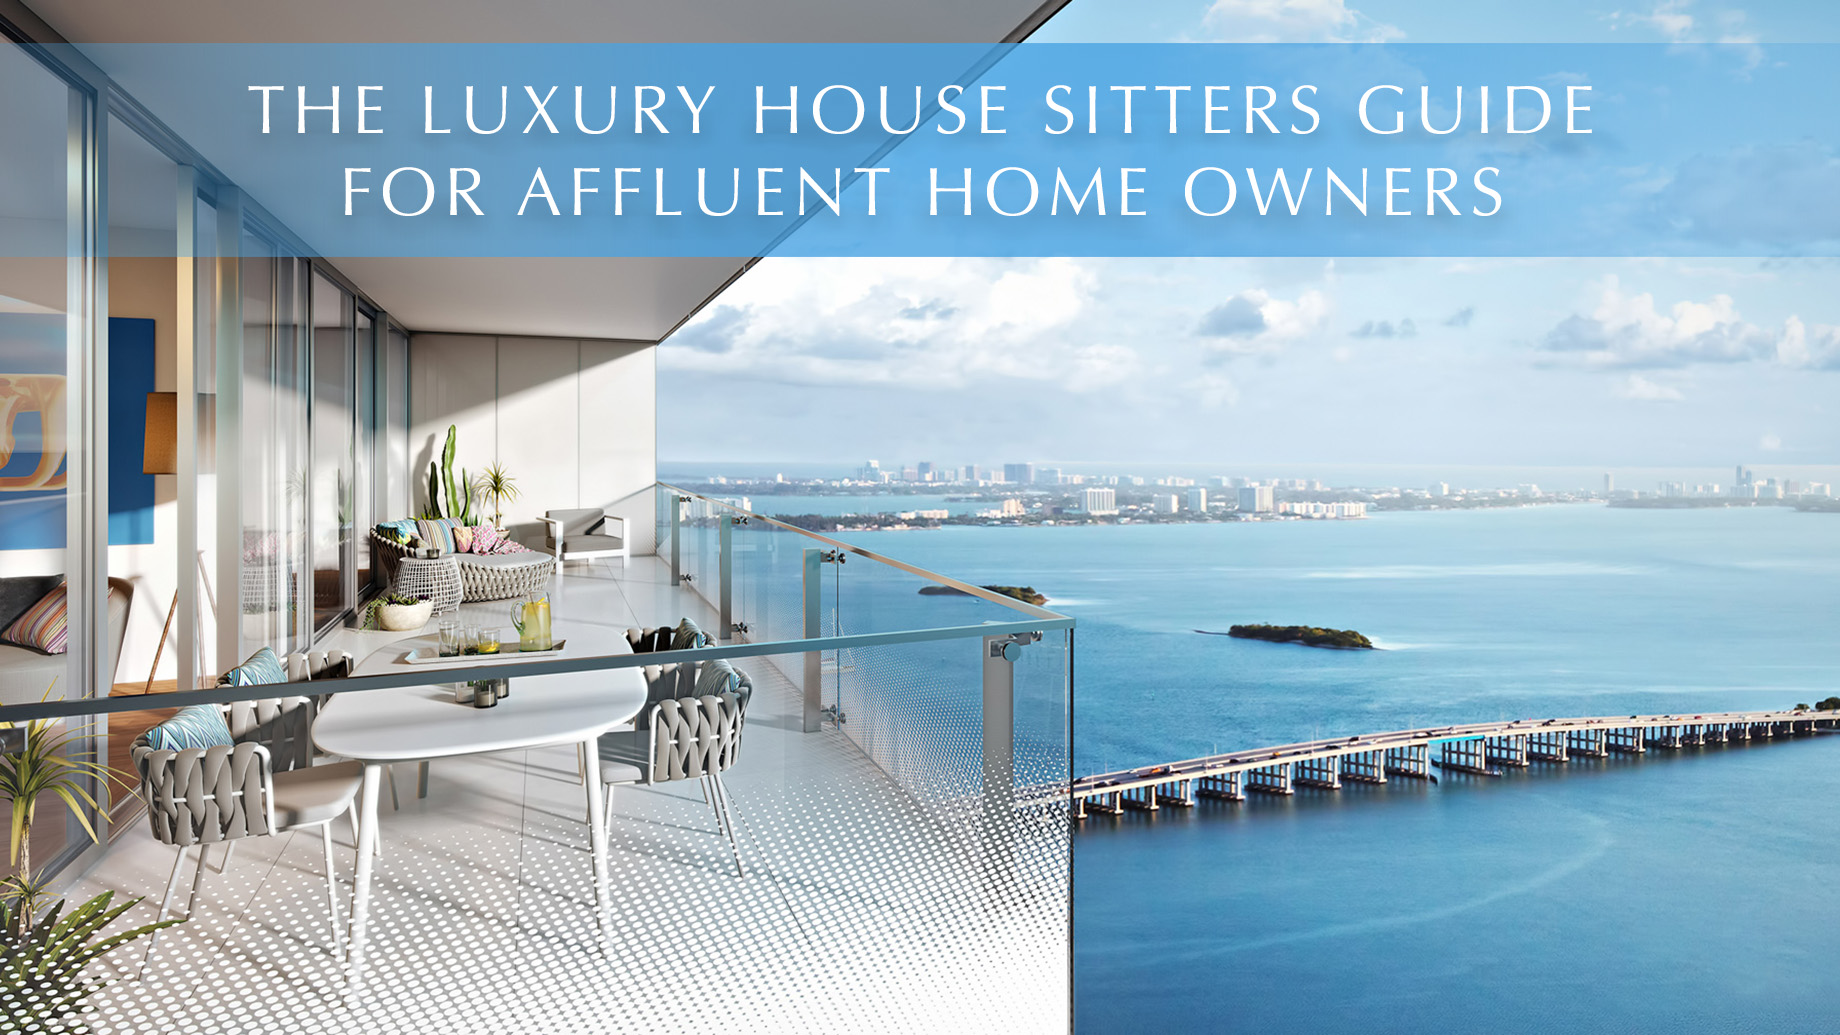 The Luxury House Sitters Guide for Affluent Home Owners